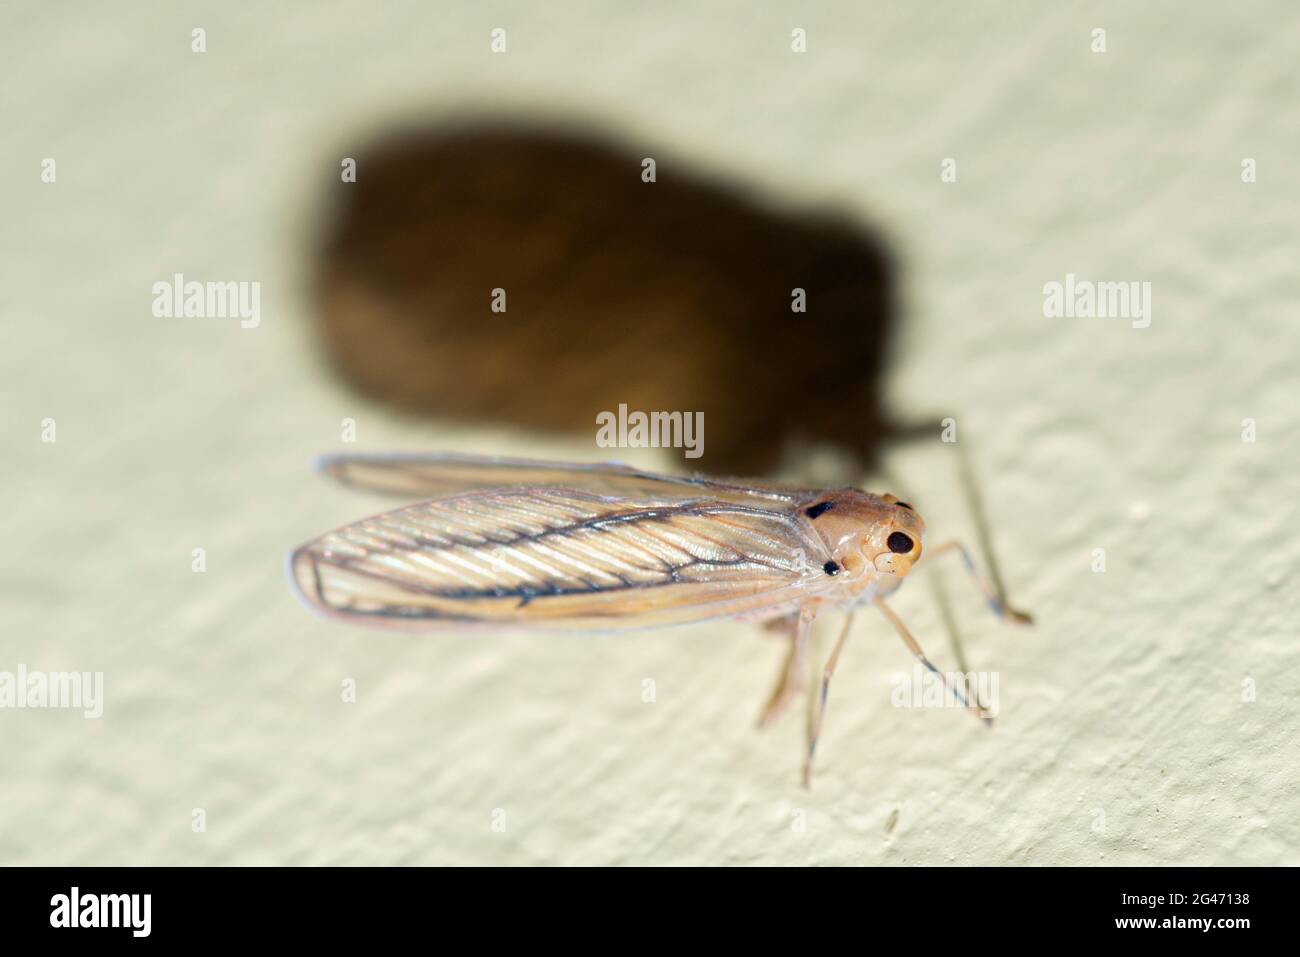 Leafhopper, Cicadellidae Family, with shadow, Klungkung, Bali, Indonesia Stock Photo